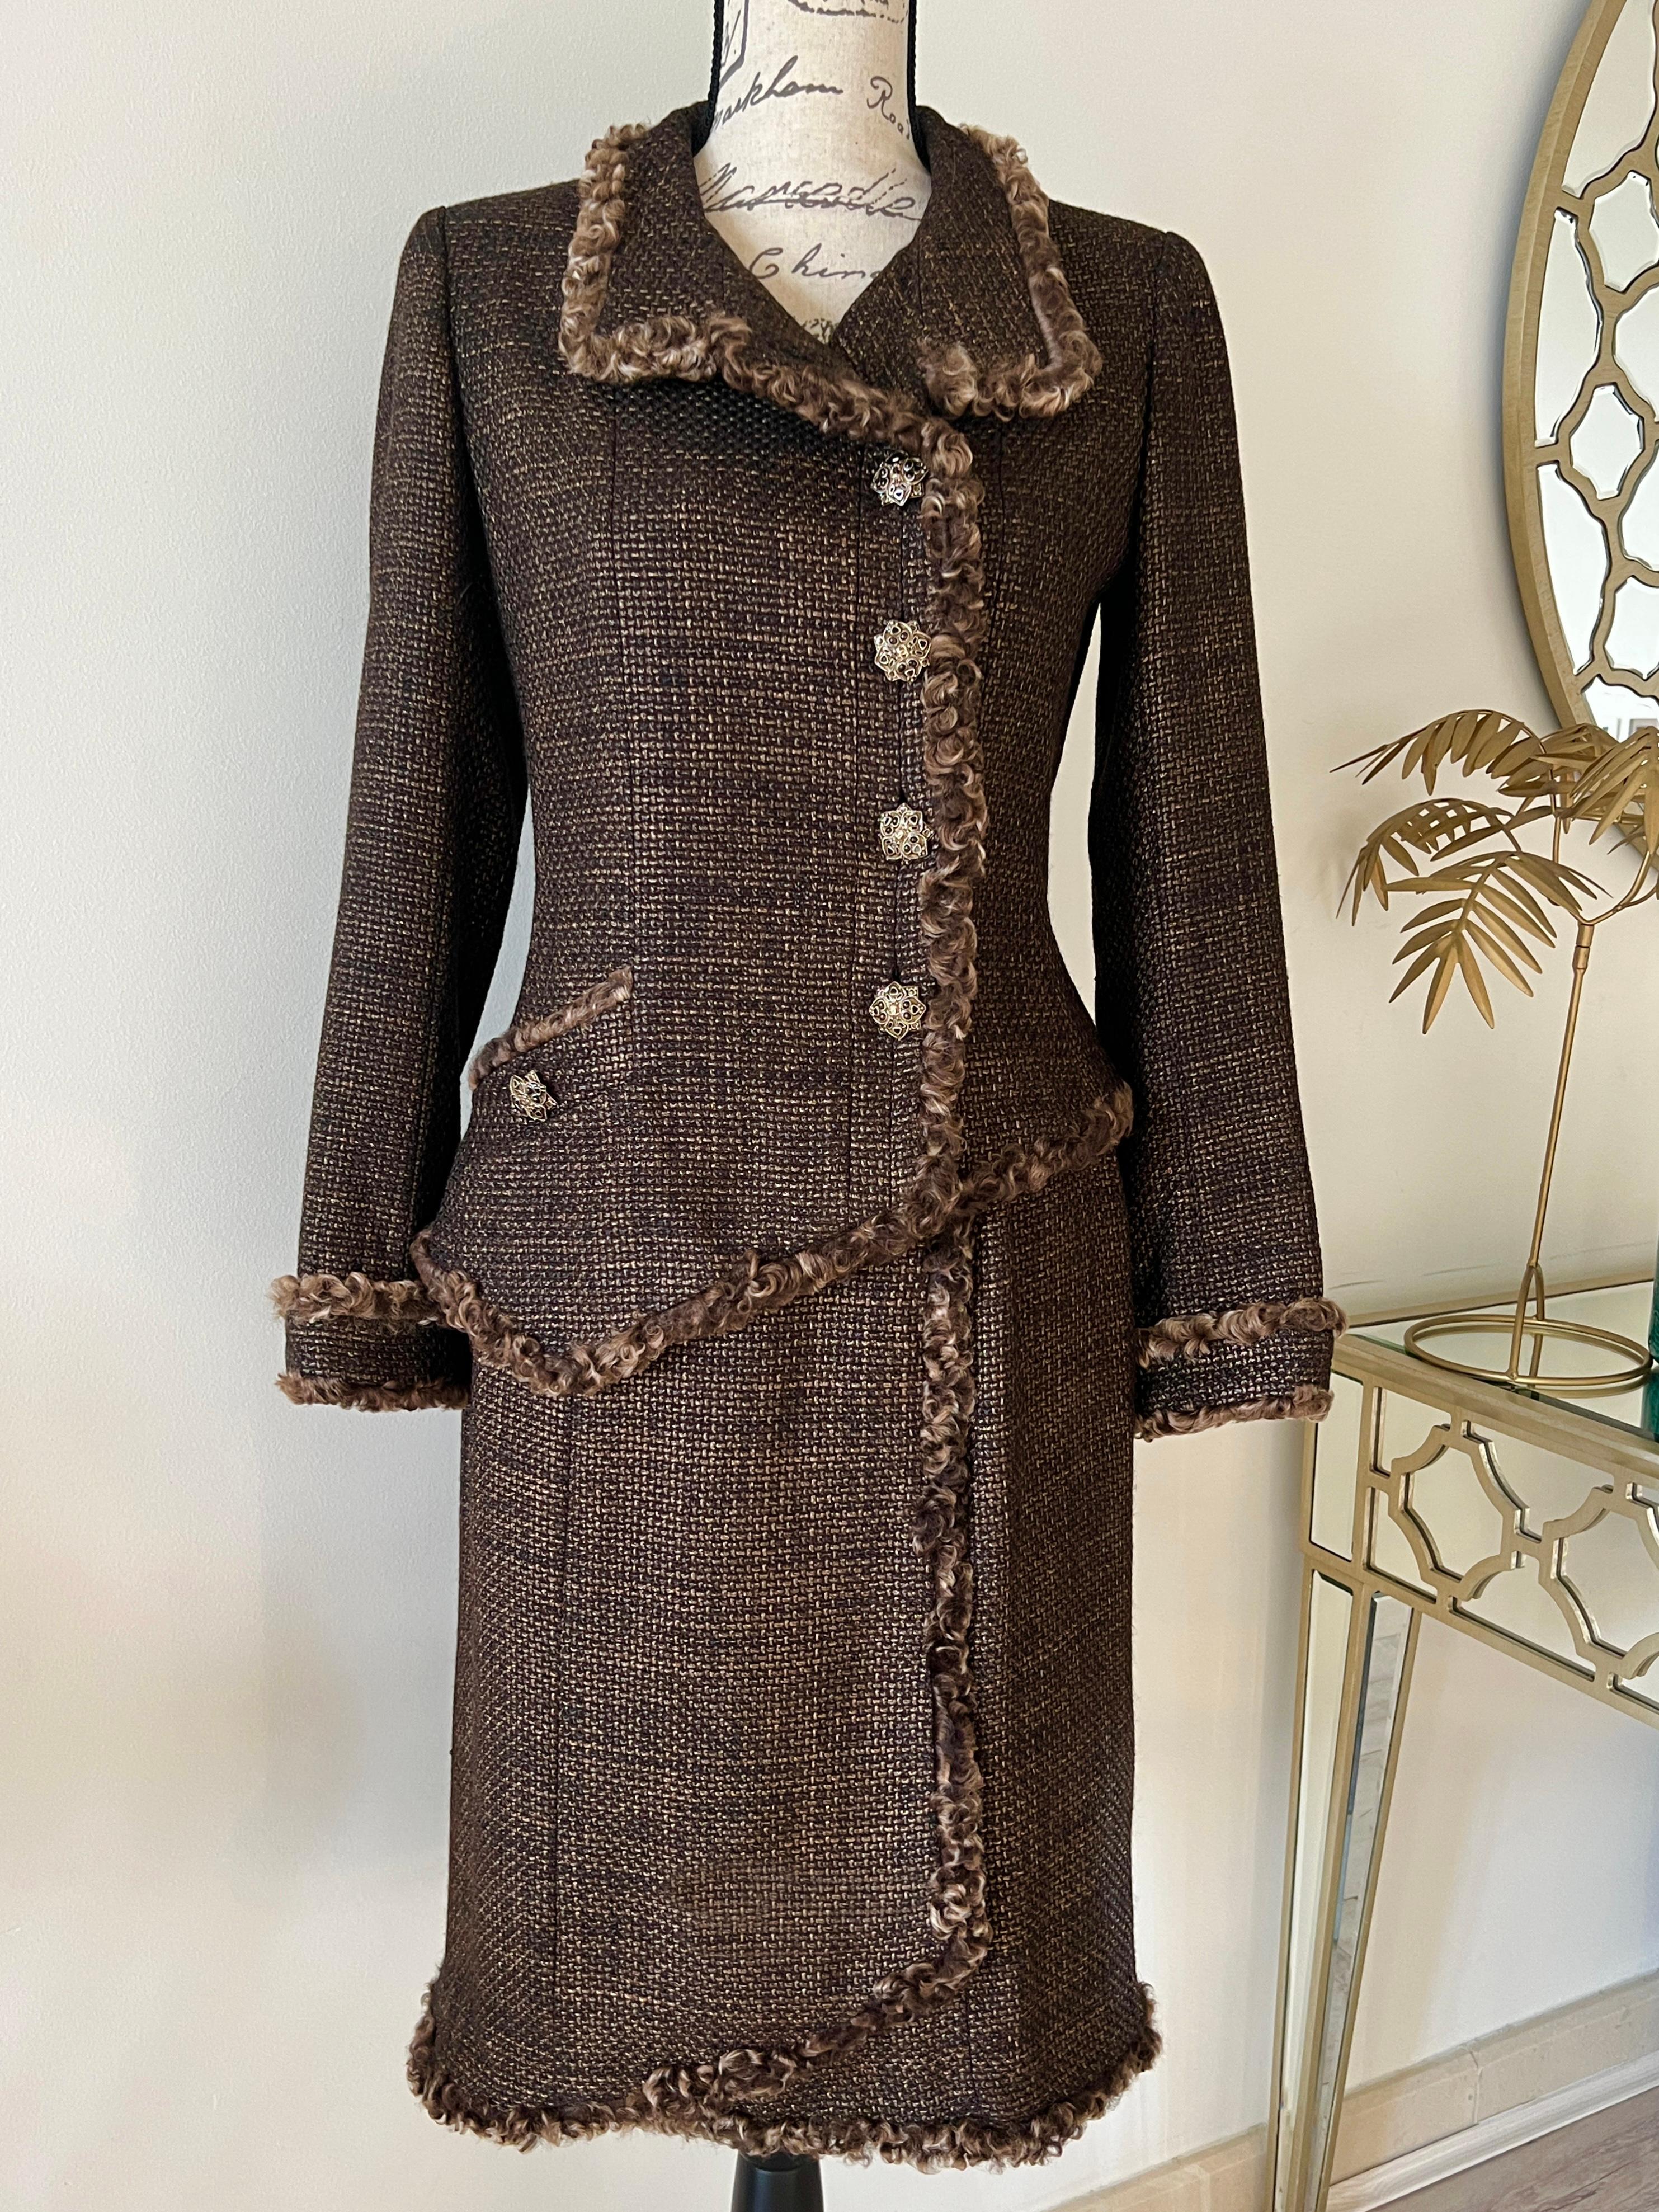 Women's Chanel Extremely Rare Jewel Buttons Tweed Suit For Sale